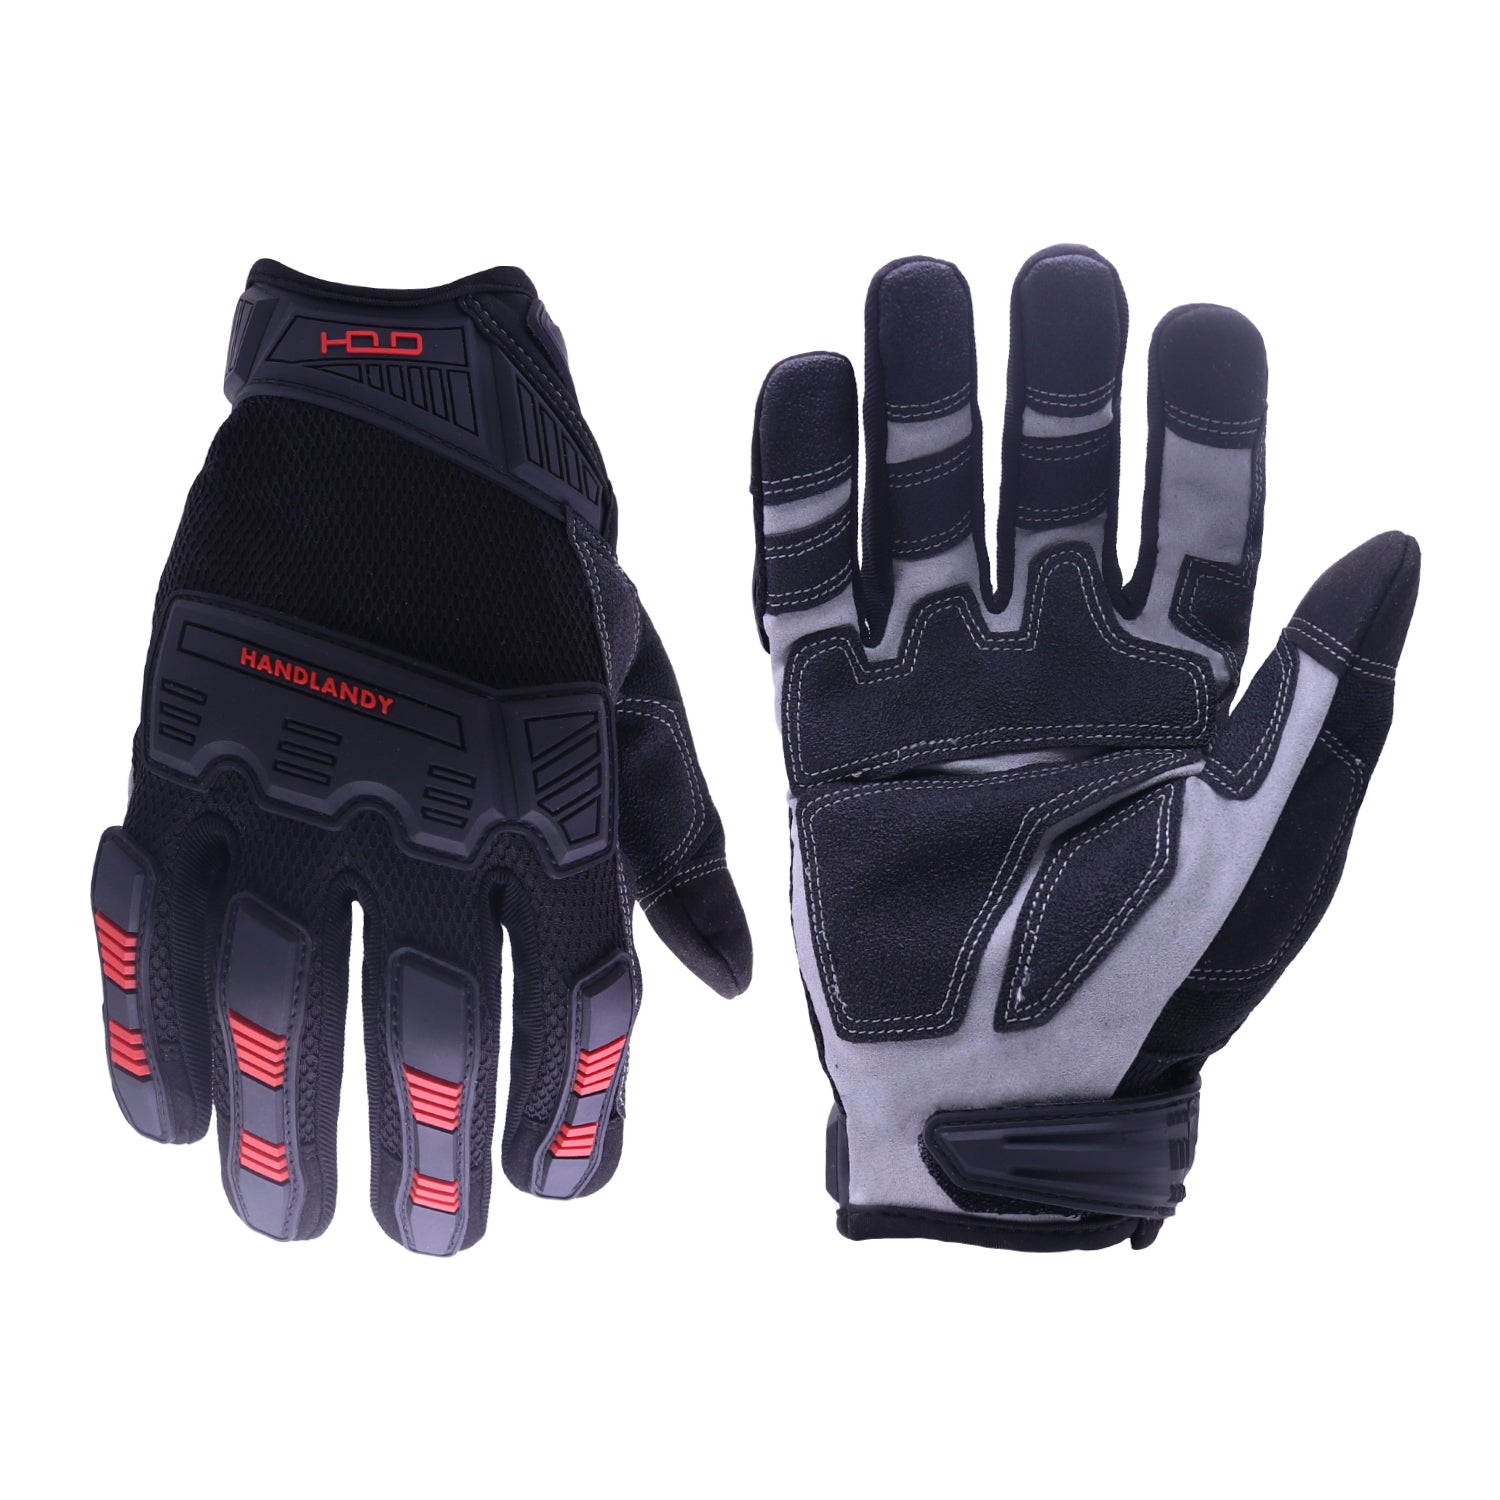 Toledano Industries 3 Pair Small Leather Work Gloves. Ideal Hand Protection All environments.